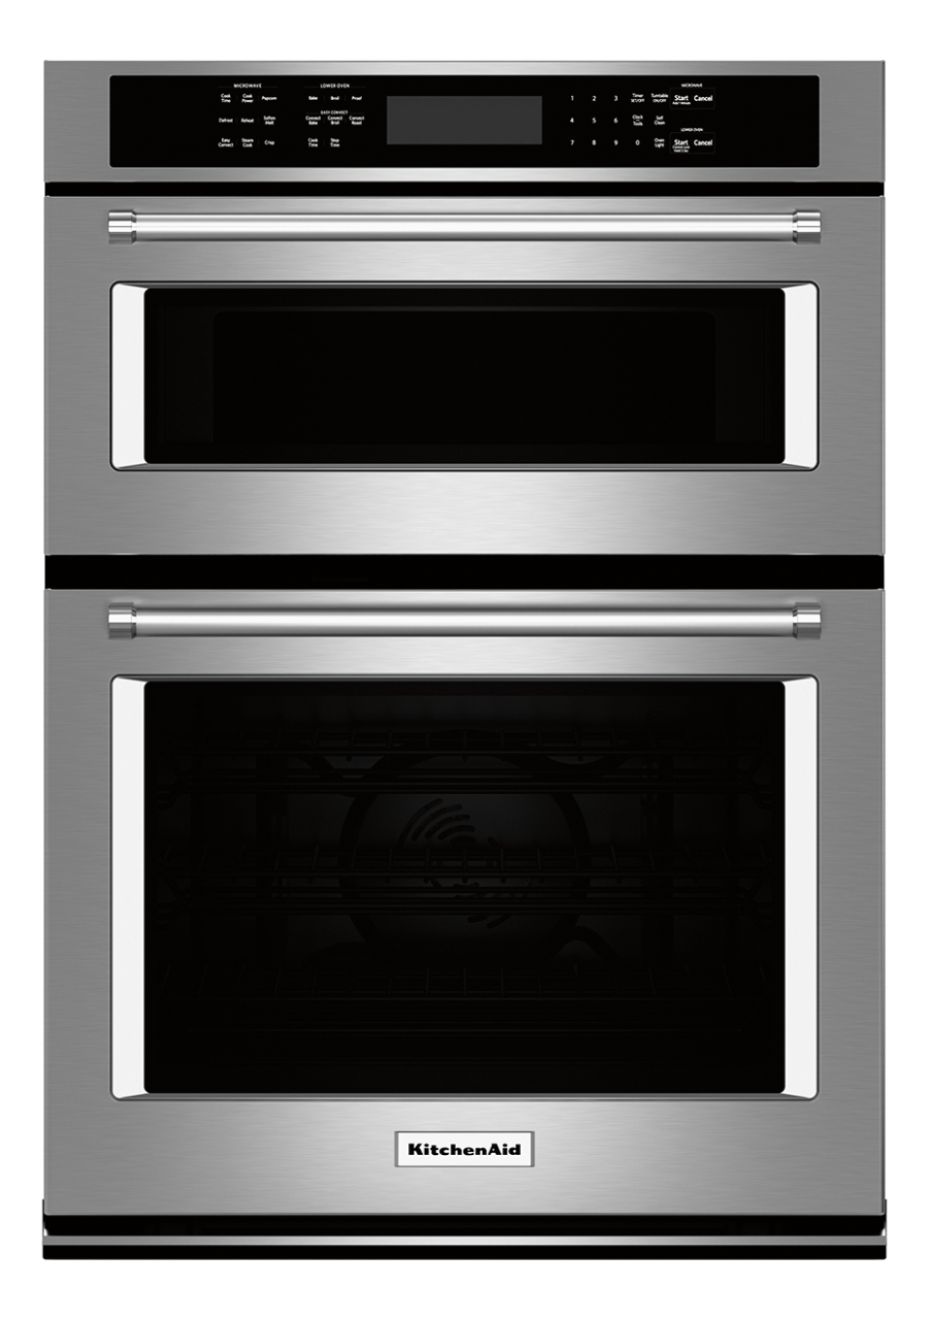 KitchenAid - 27" Single Electric Convection Wall Oven with Built-In Microwave - Stainless steel